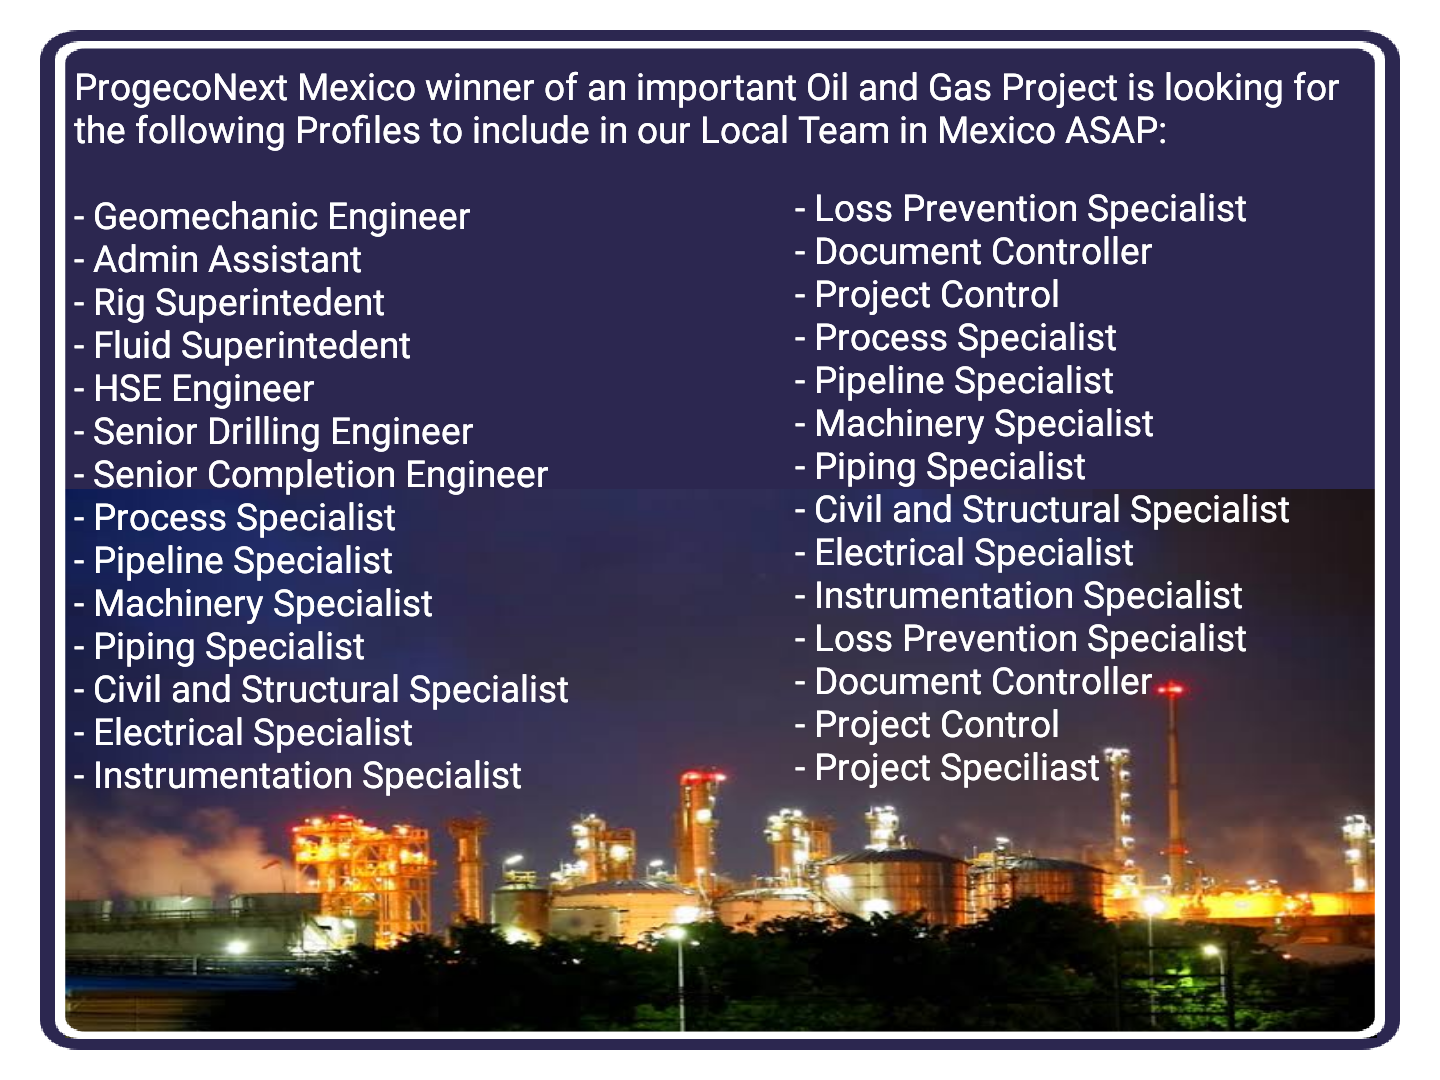 Process, Piping, Electrical, Instrument, Civil & Structural Specialist Jobs